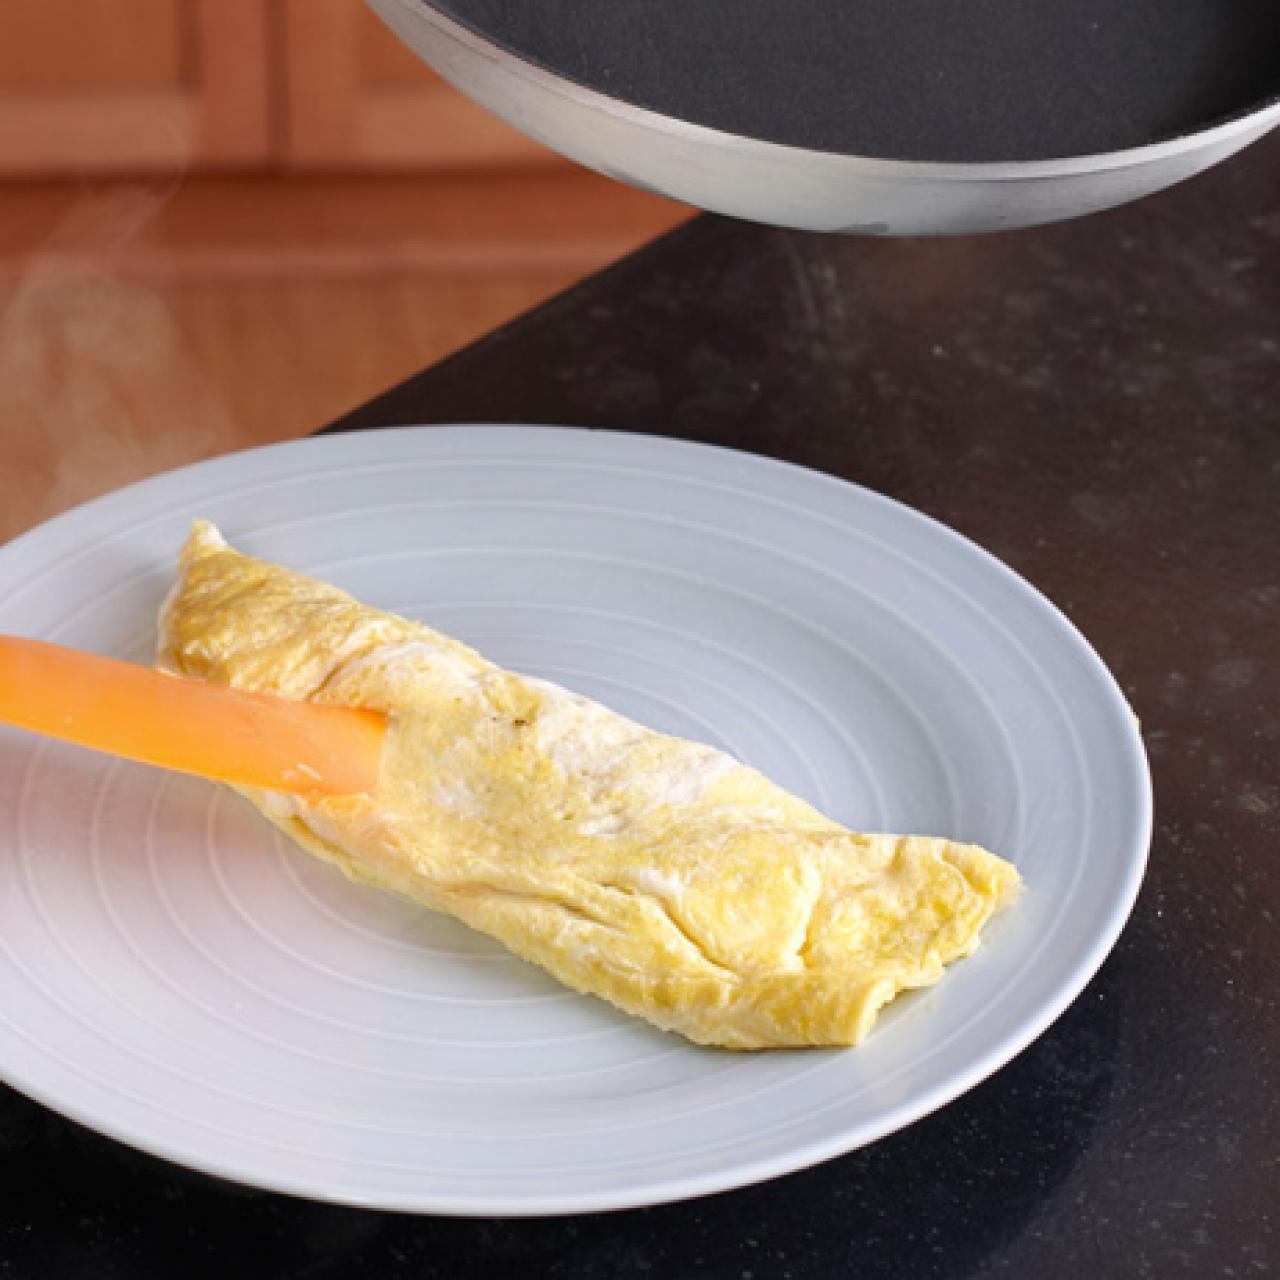 World's Best Omelet Pan  I Show You Why 